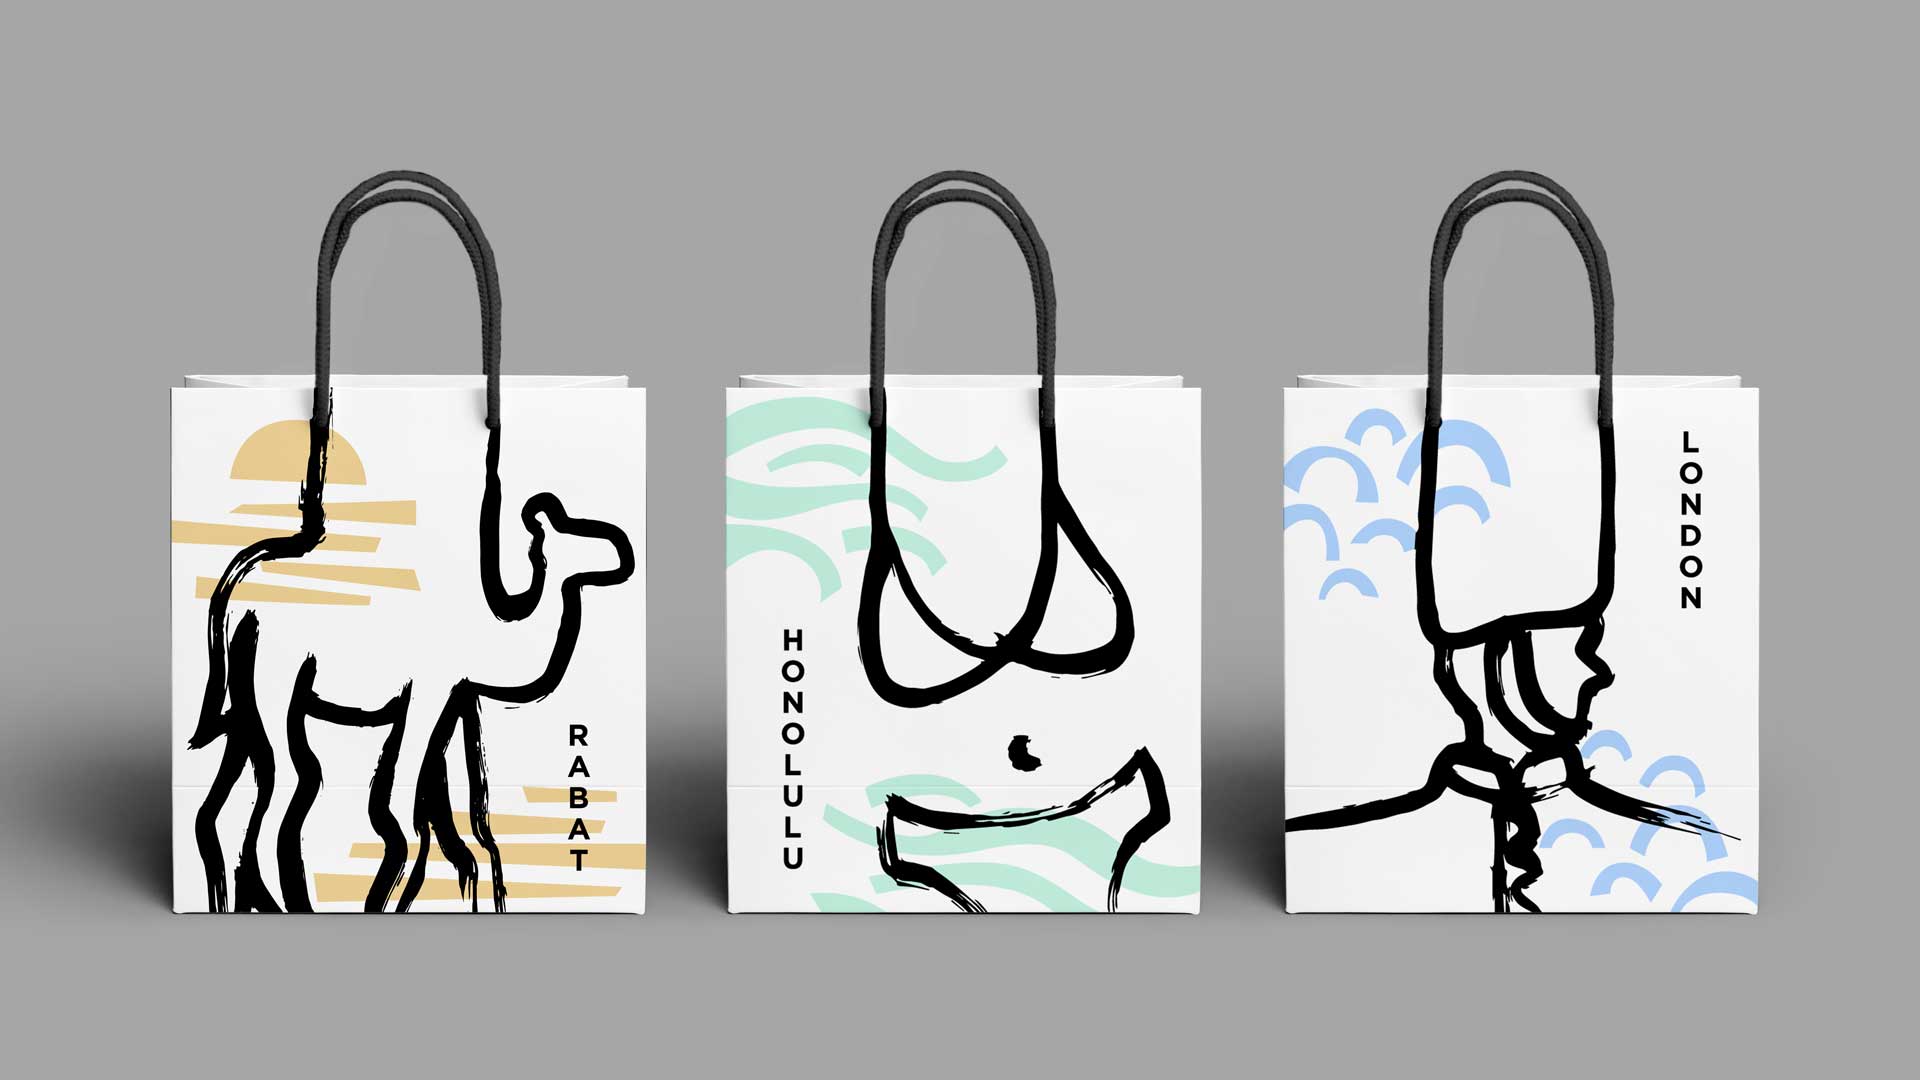 Three shopping bags with black line drawings. The line drawings connect to the bag handles creating a camel for Rabat, a swimsuit for Honolulu and the hat on a guard for London.